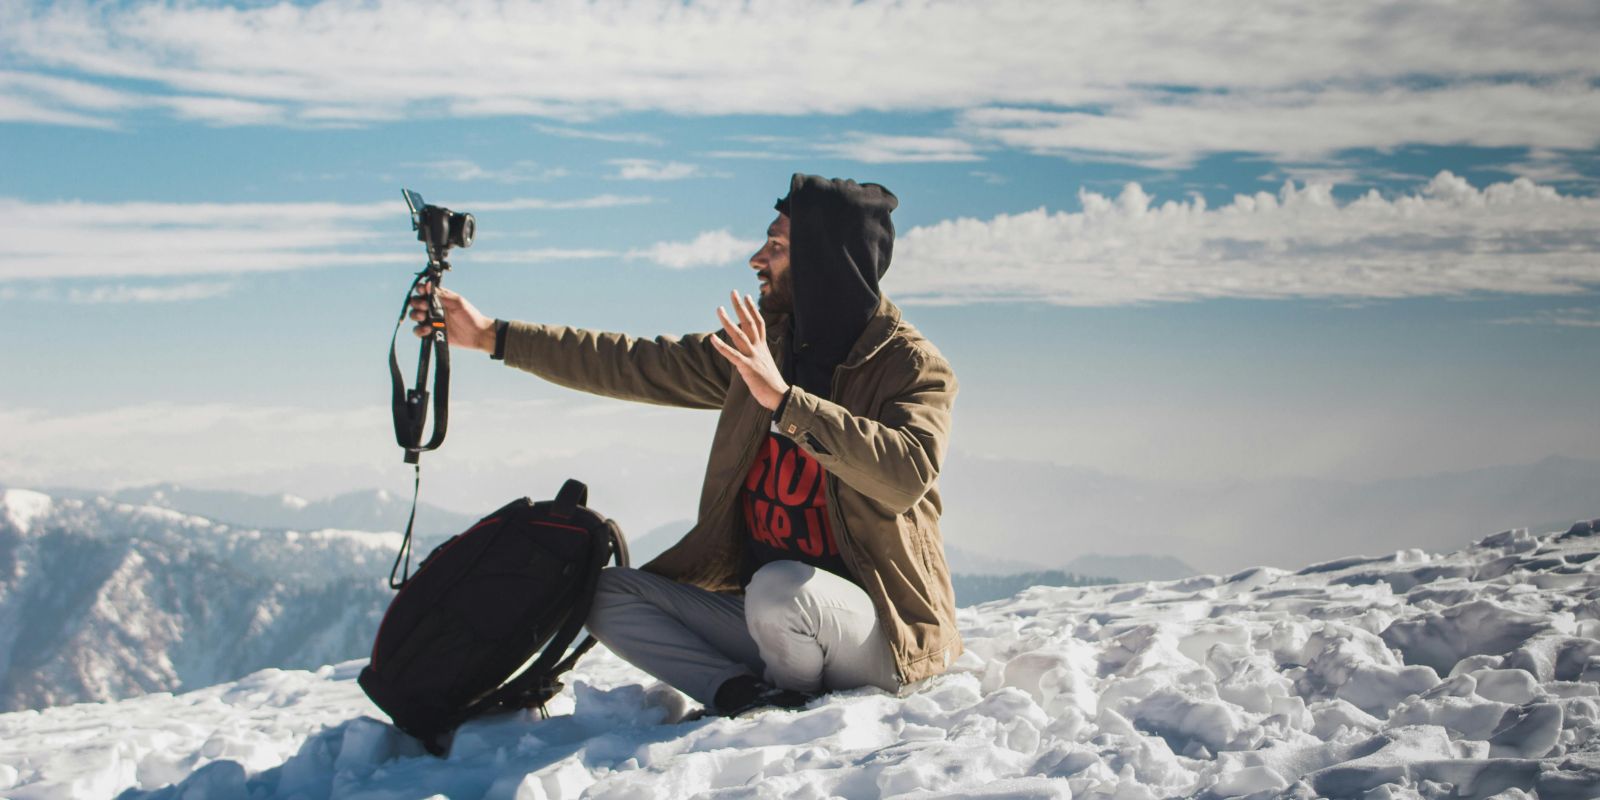 A traveler sets up a camera to capture a video in a snowy mountainous landscape, expressing joy and excitement.